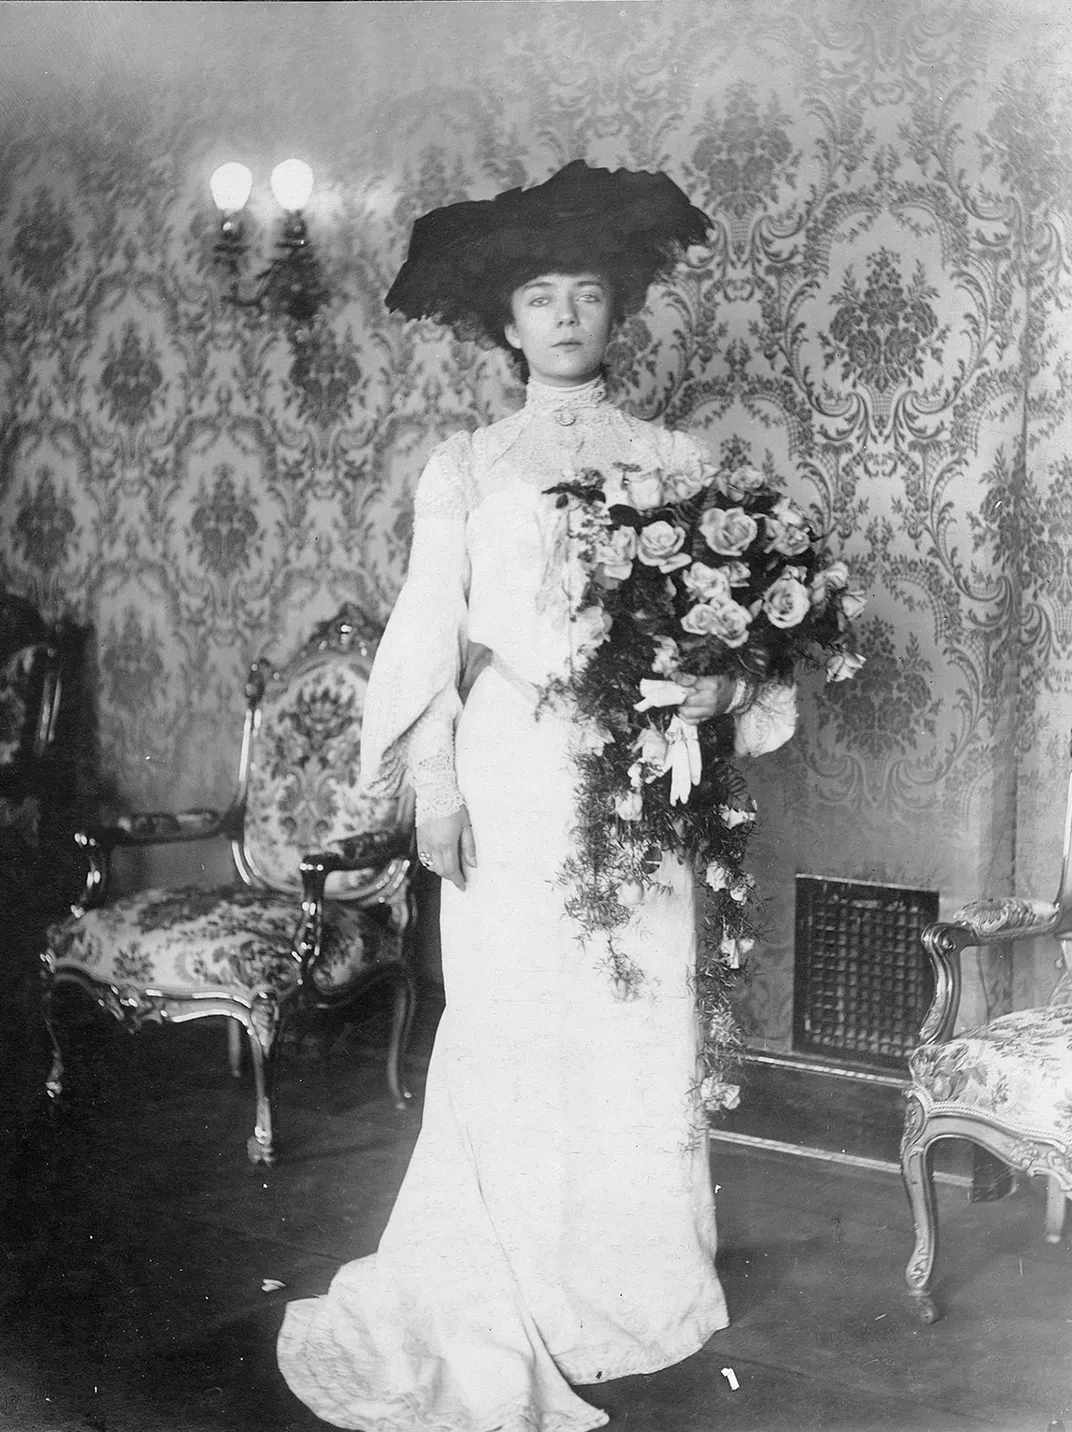 Alice Roosevelt at the 1904 St. Louis World's Fair